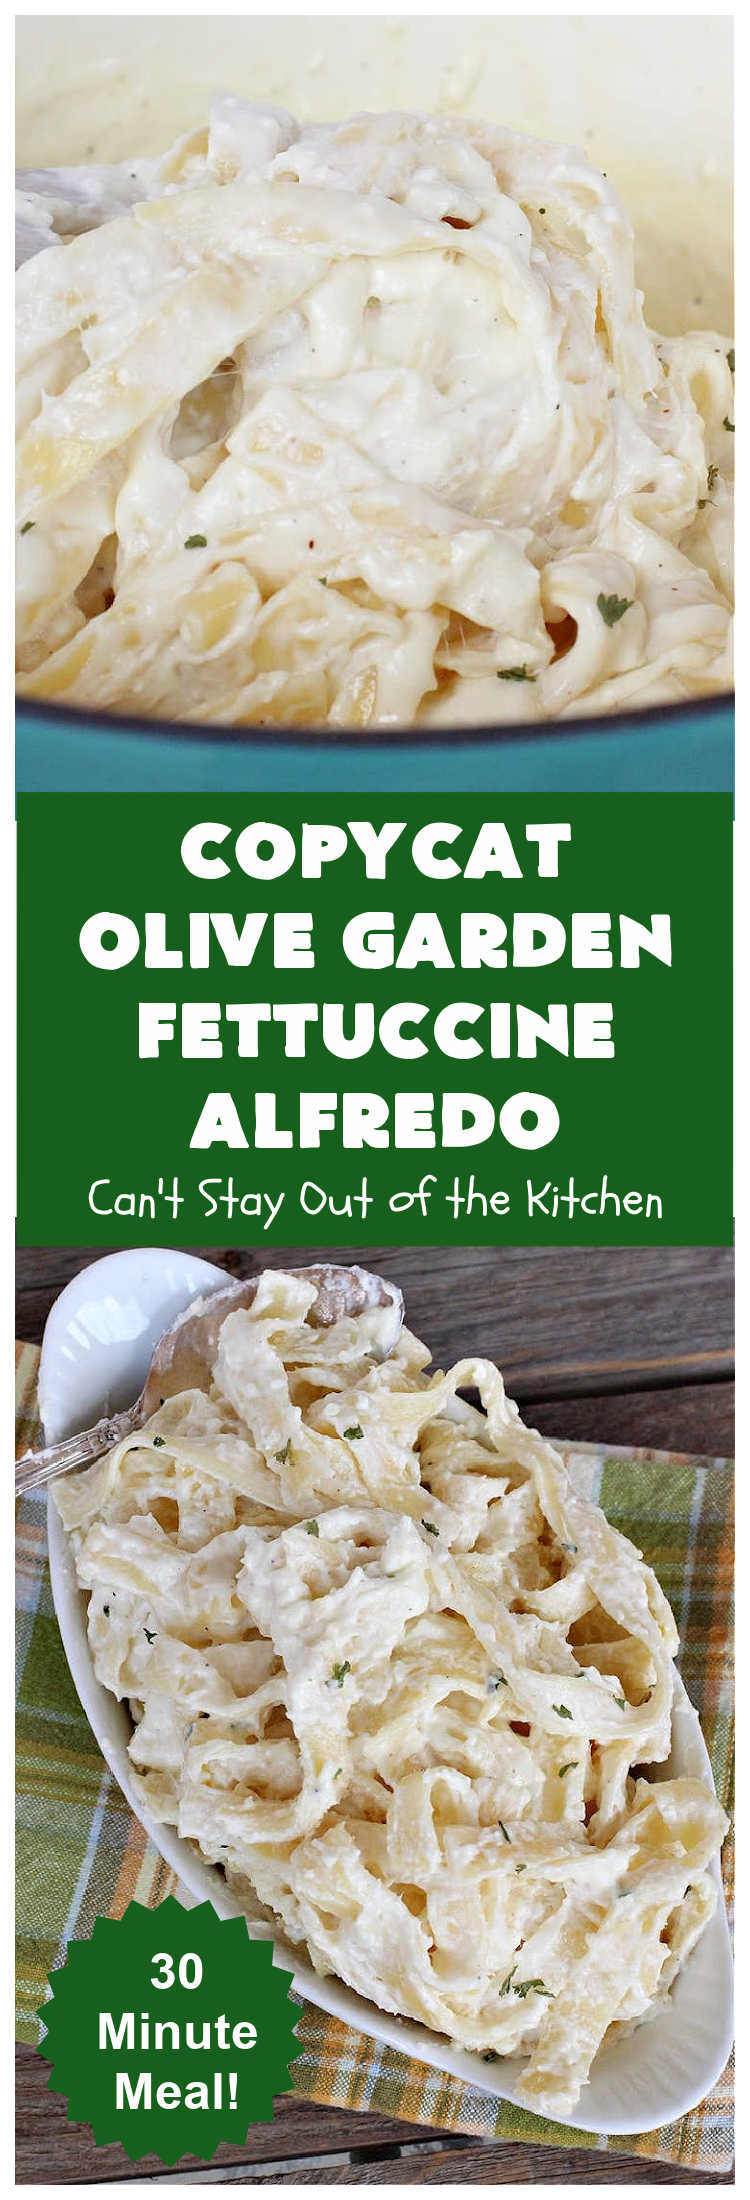 Copycat Olive Garden Fettuccine Alfredo | Can't Stay Out of the Kitchen | Enjoy #OliveGarden's #FettuccineAlfredo at home with this fantastic #CopycatRecipe. Ready in less than 30 minutes! Every bite will have you salivating for more. #noodles #pasta #fettuccine #ParmesanCheese #OliveGardenFettuccineAlfredo #CopycatOliveGardenFettuccineAlfredo